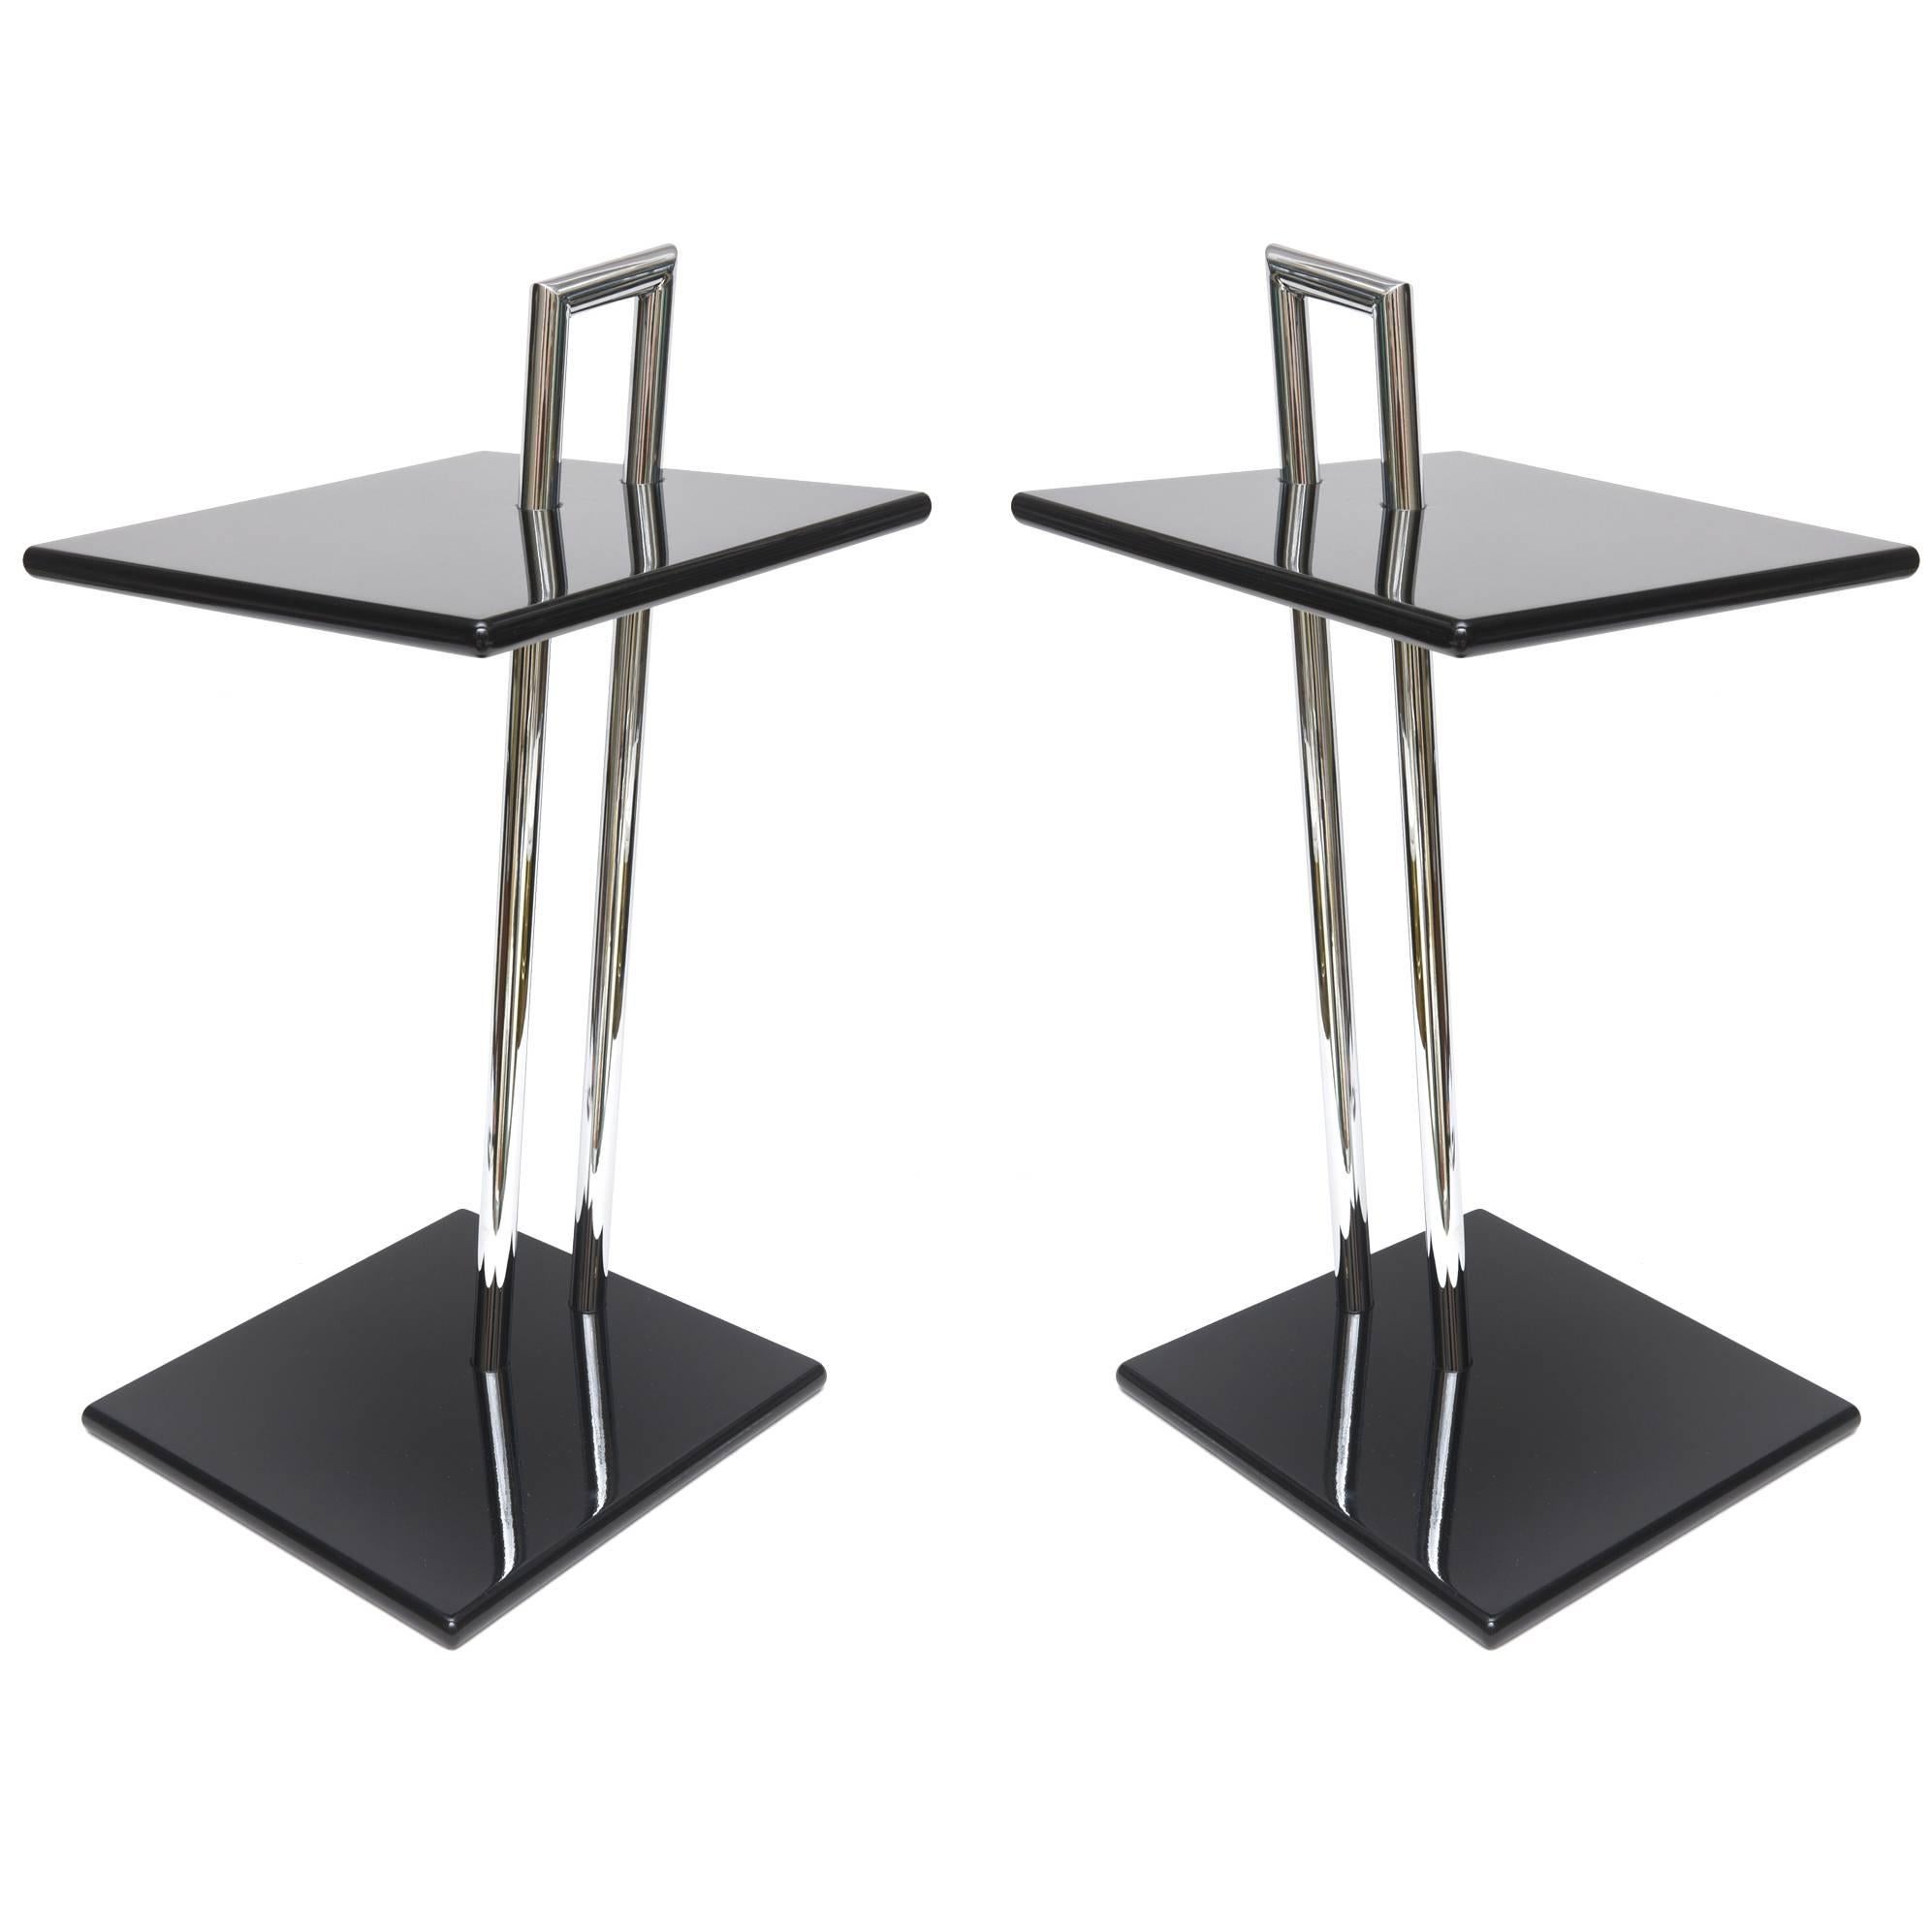  Eileen Gray Second Edition Black Lacquer Wood and Chrome Side Tables/ SALE